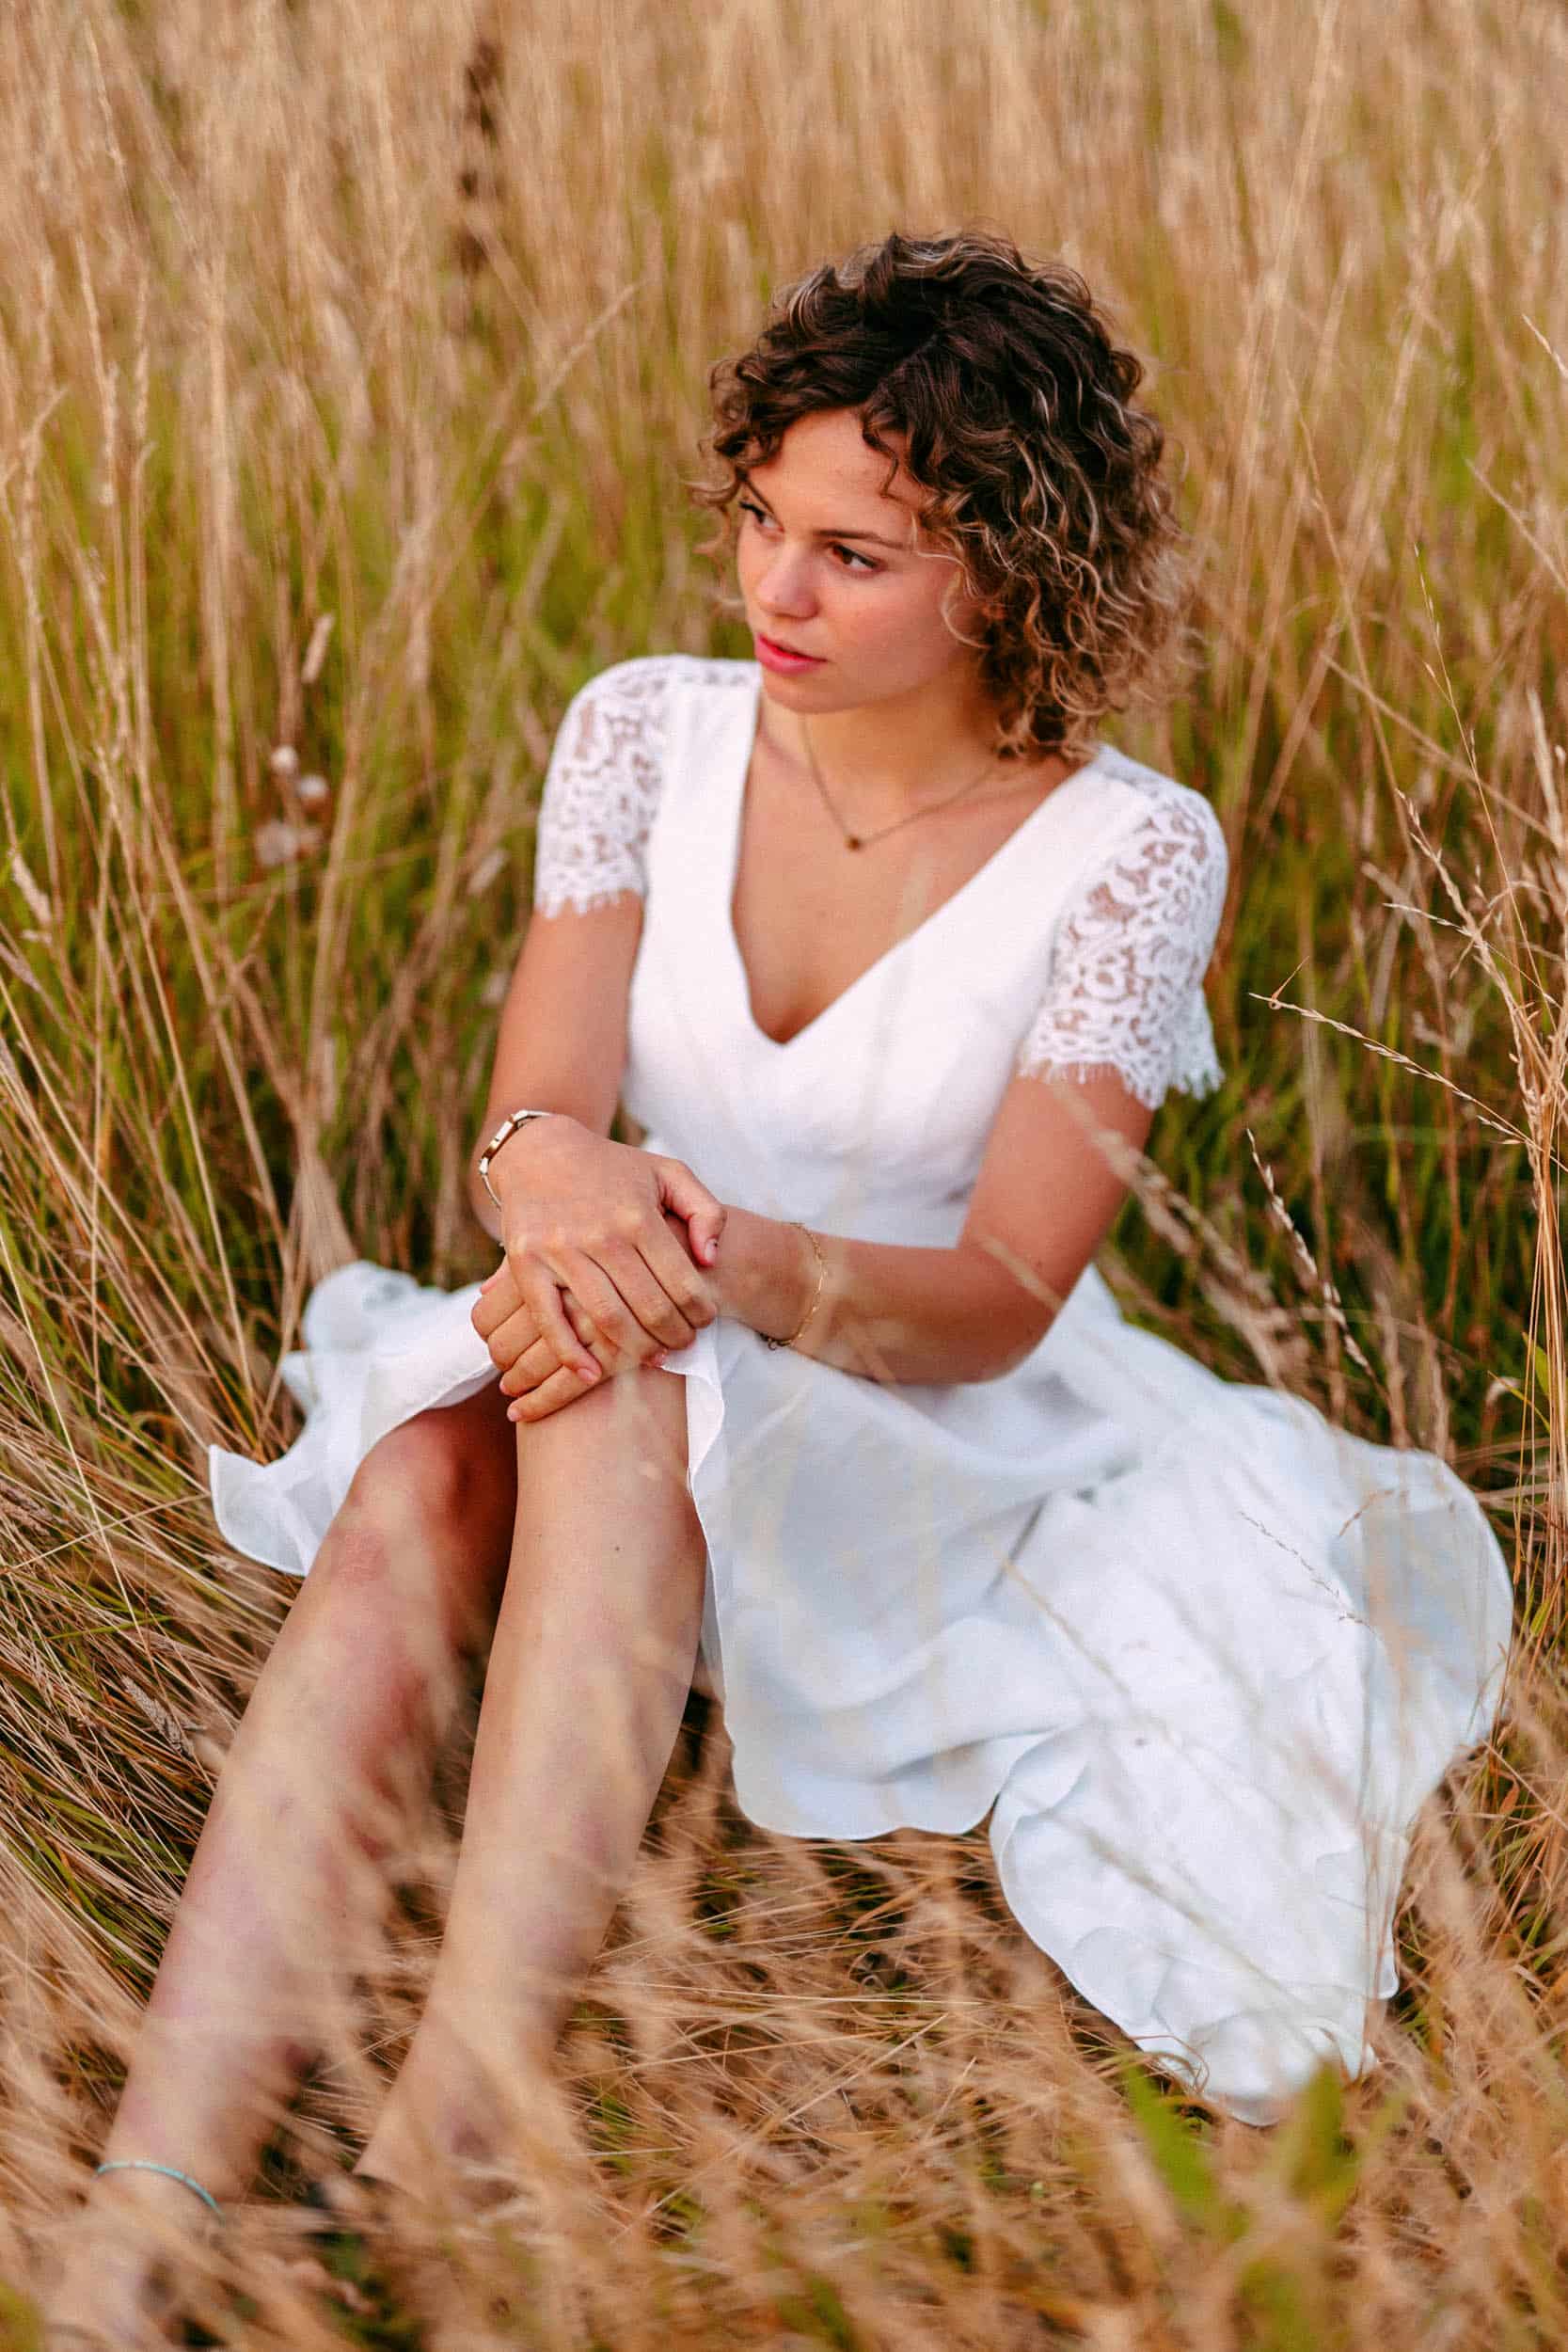 A woman in a white dress, starting to plan her wedding, while sitting in the tall grass.